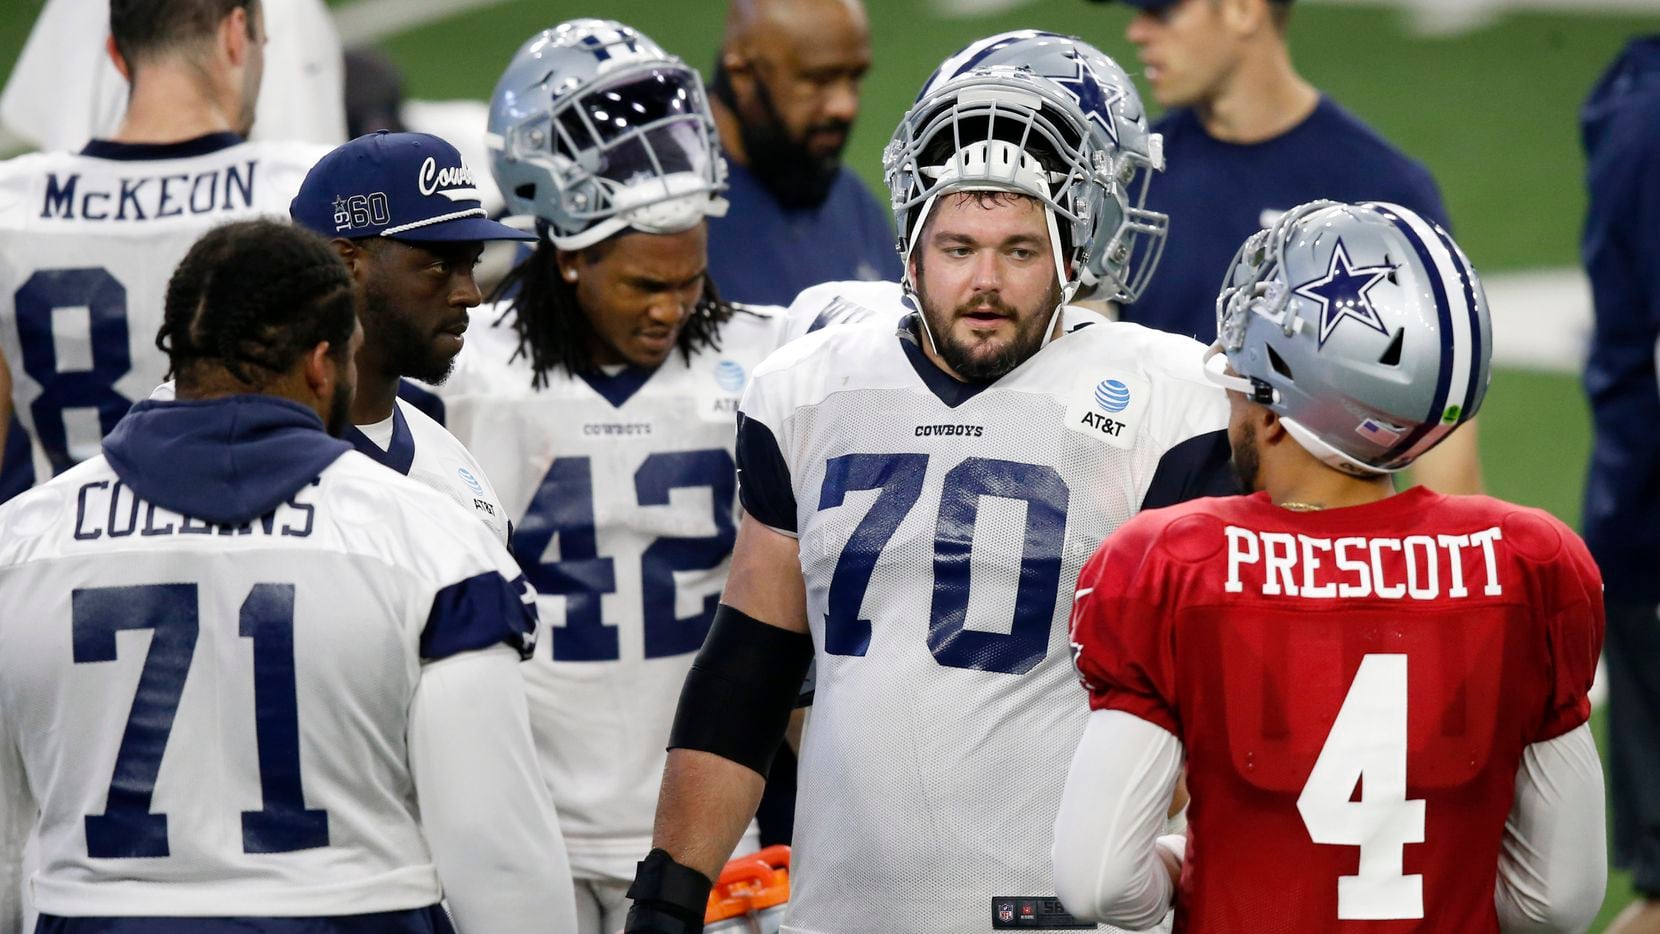 Dallas Cowboys quarterback Dak Prescott (4) talks with Dallas Cowboys guard Zack Martin (70), Dallas Cowboys offensive tackle Cameron Erving (75), and Dallas Cowboys offensive tackle La'el Collins (71) during a break in practice during training camp at the Dallas Cowboys headquarters at The Star in Frisco, Texas on Sunday, August 23, 2020.